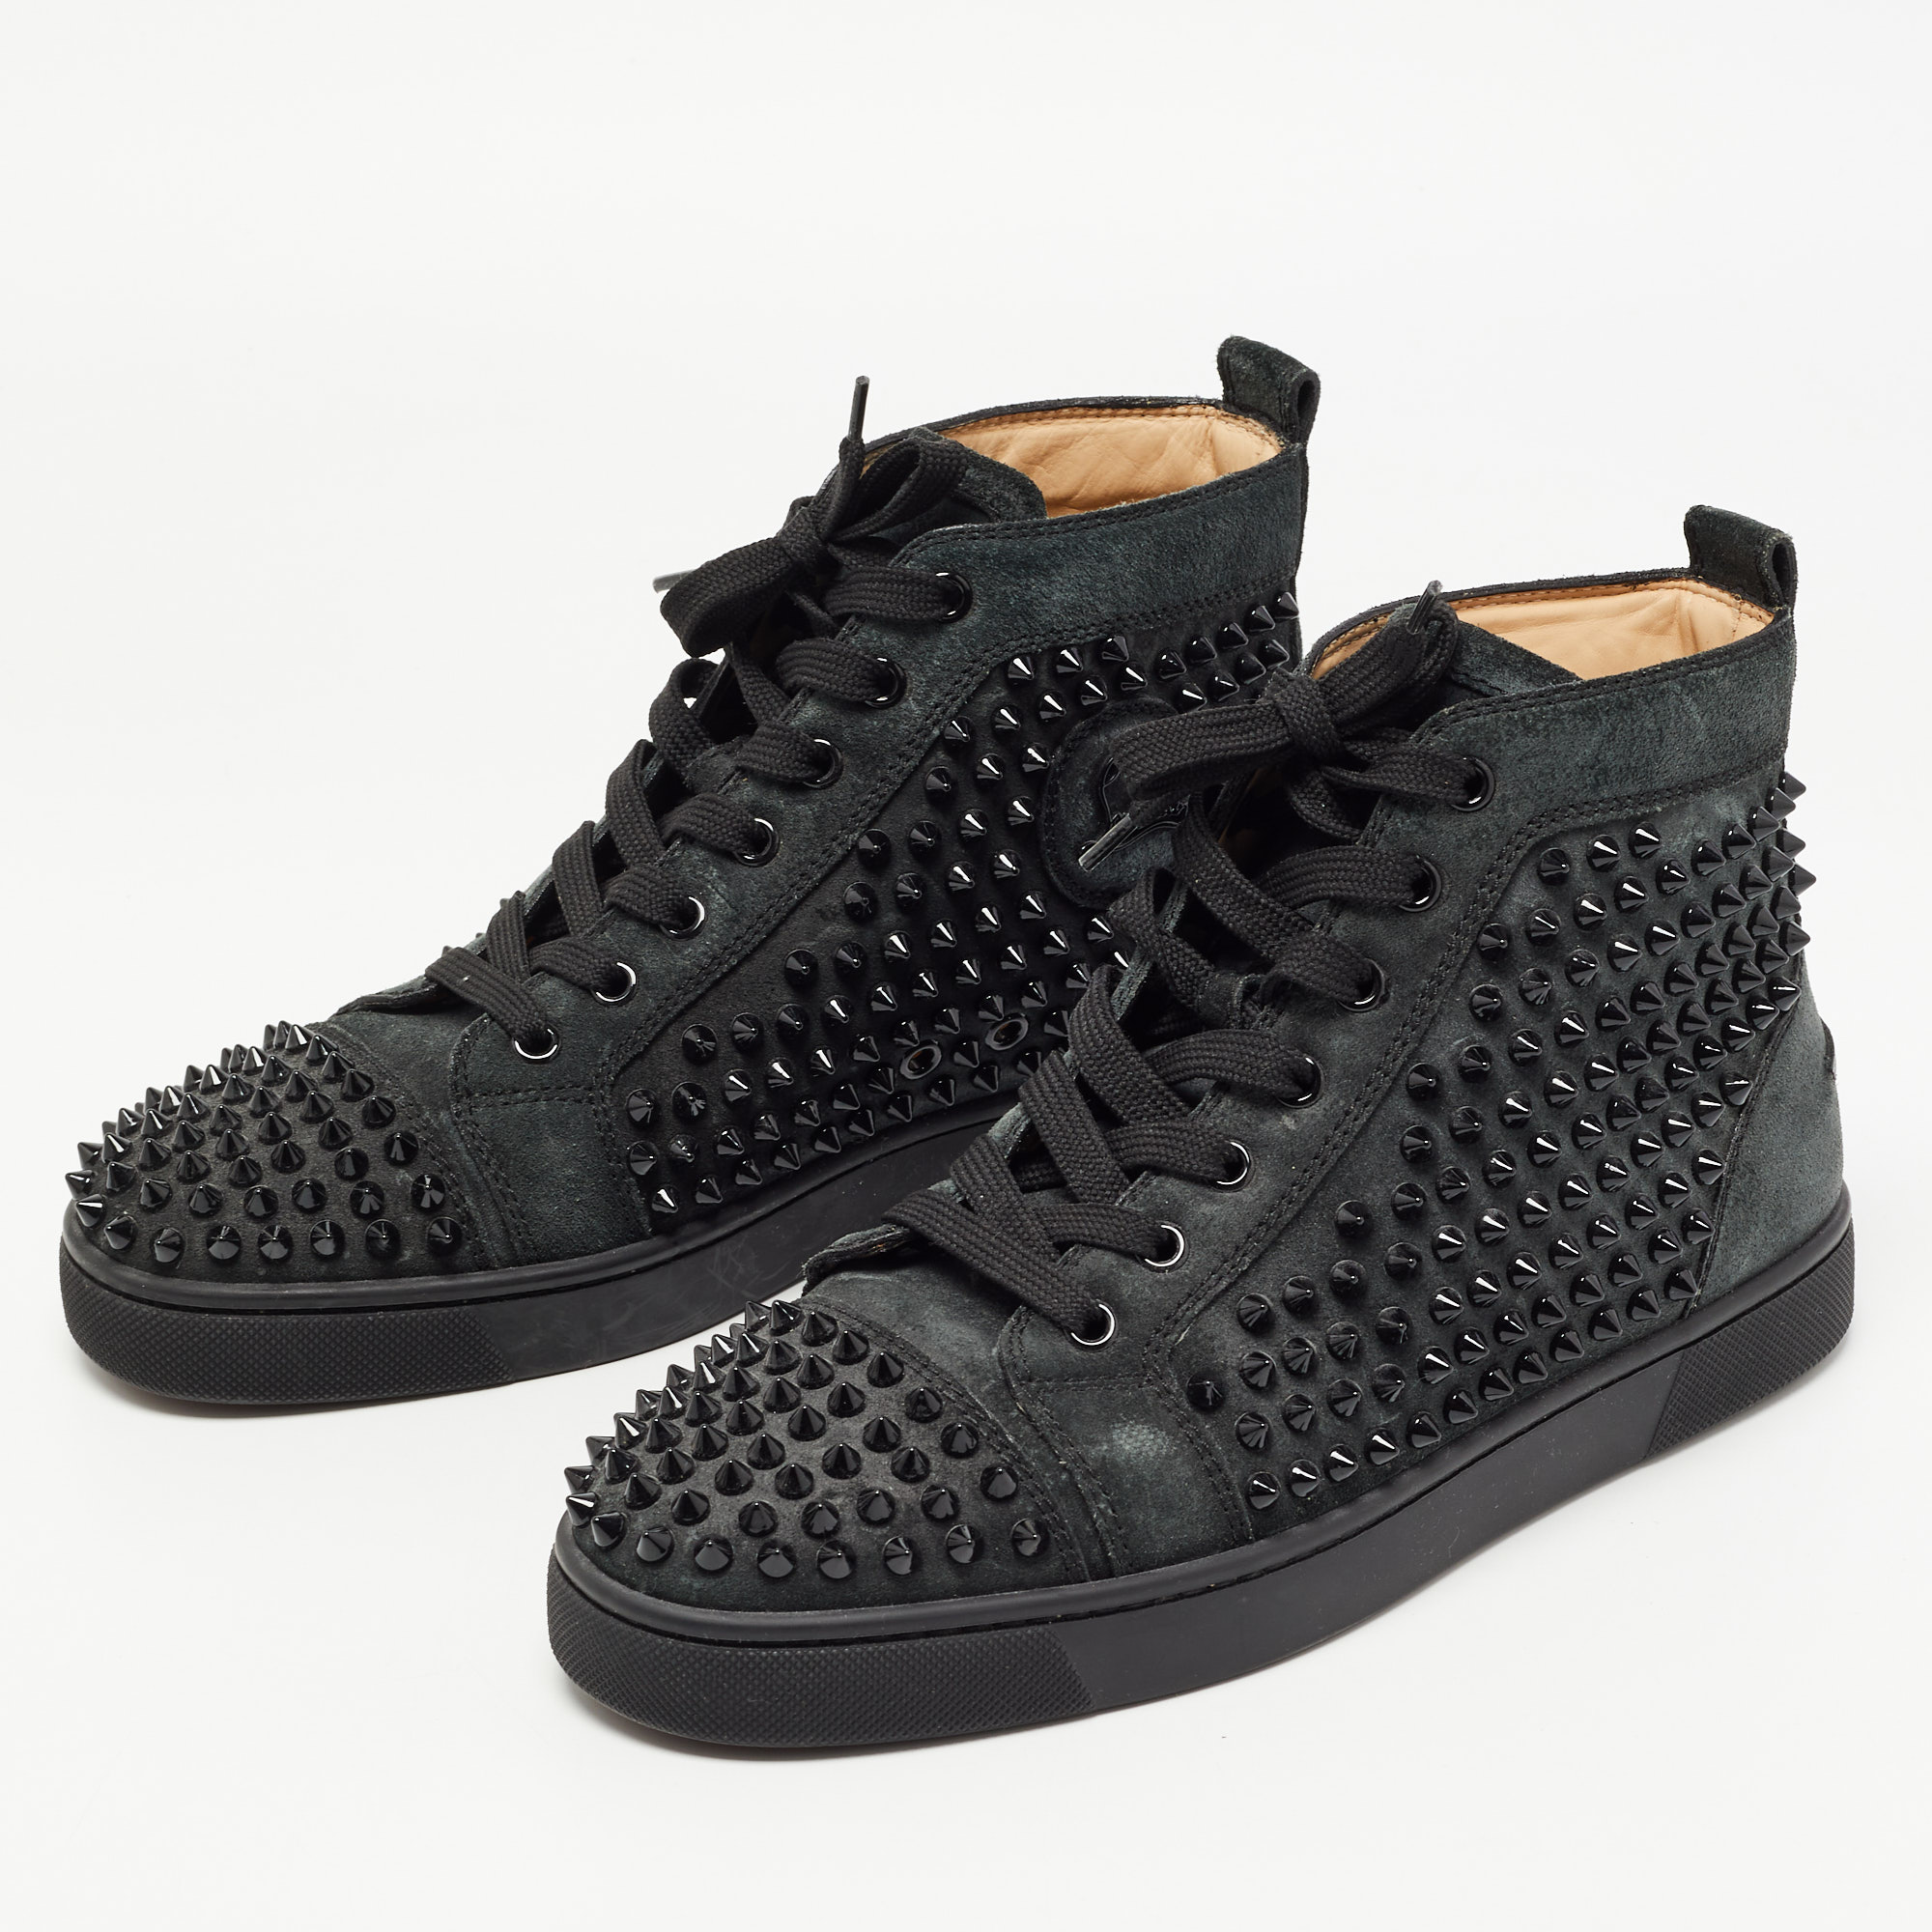 

Christian Louboutin Black Suede Spike Louis Orlato High Top Sneakers Size